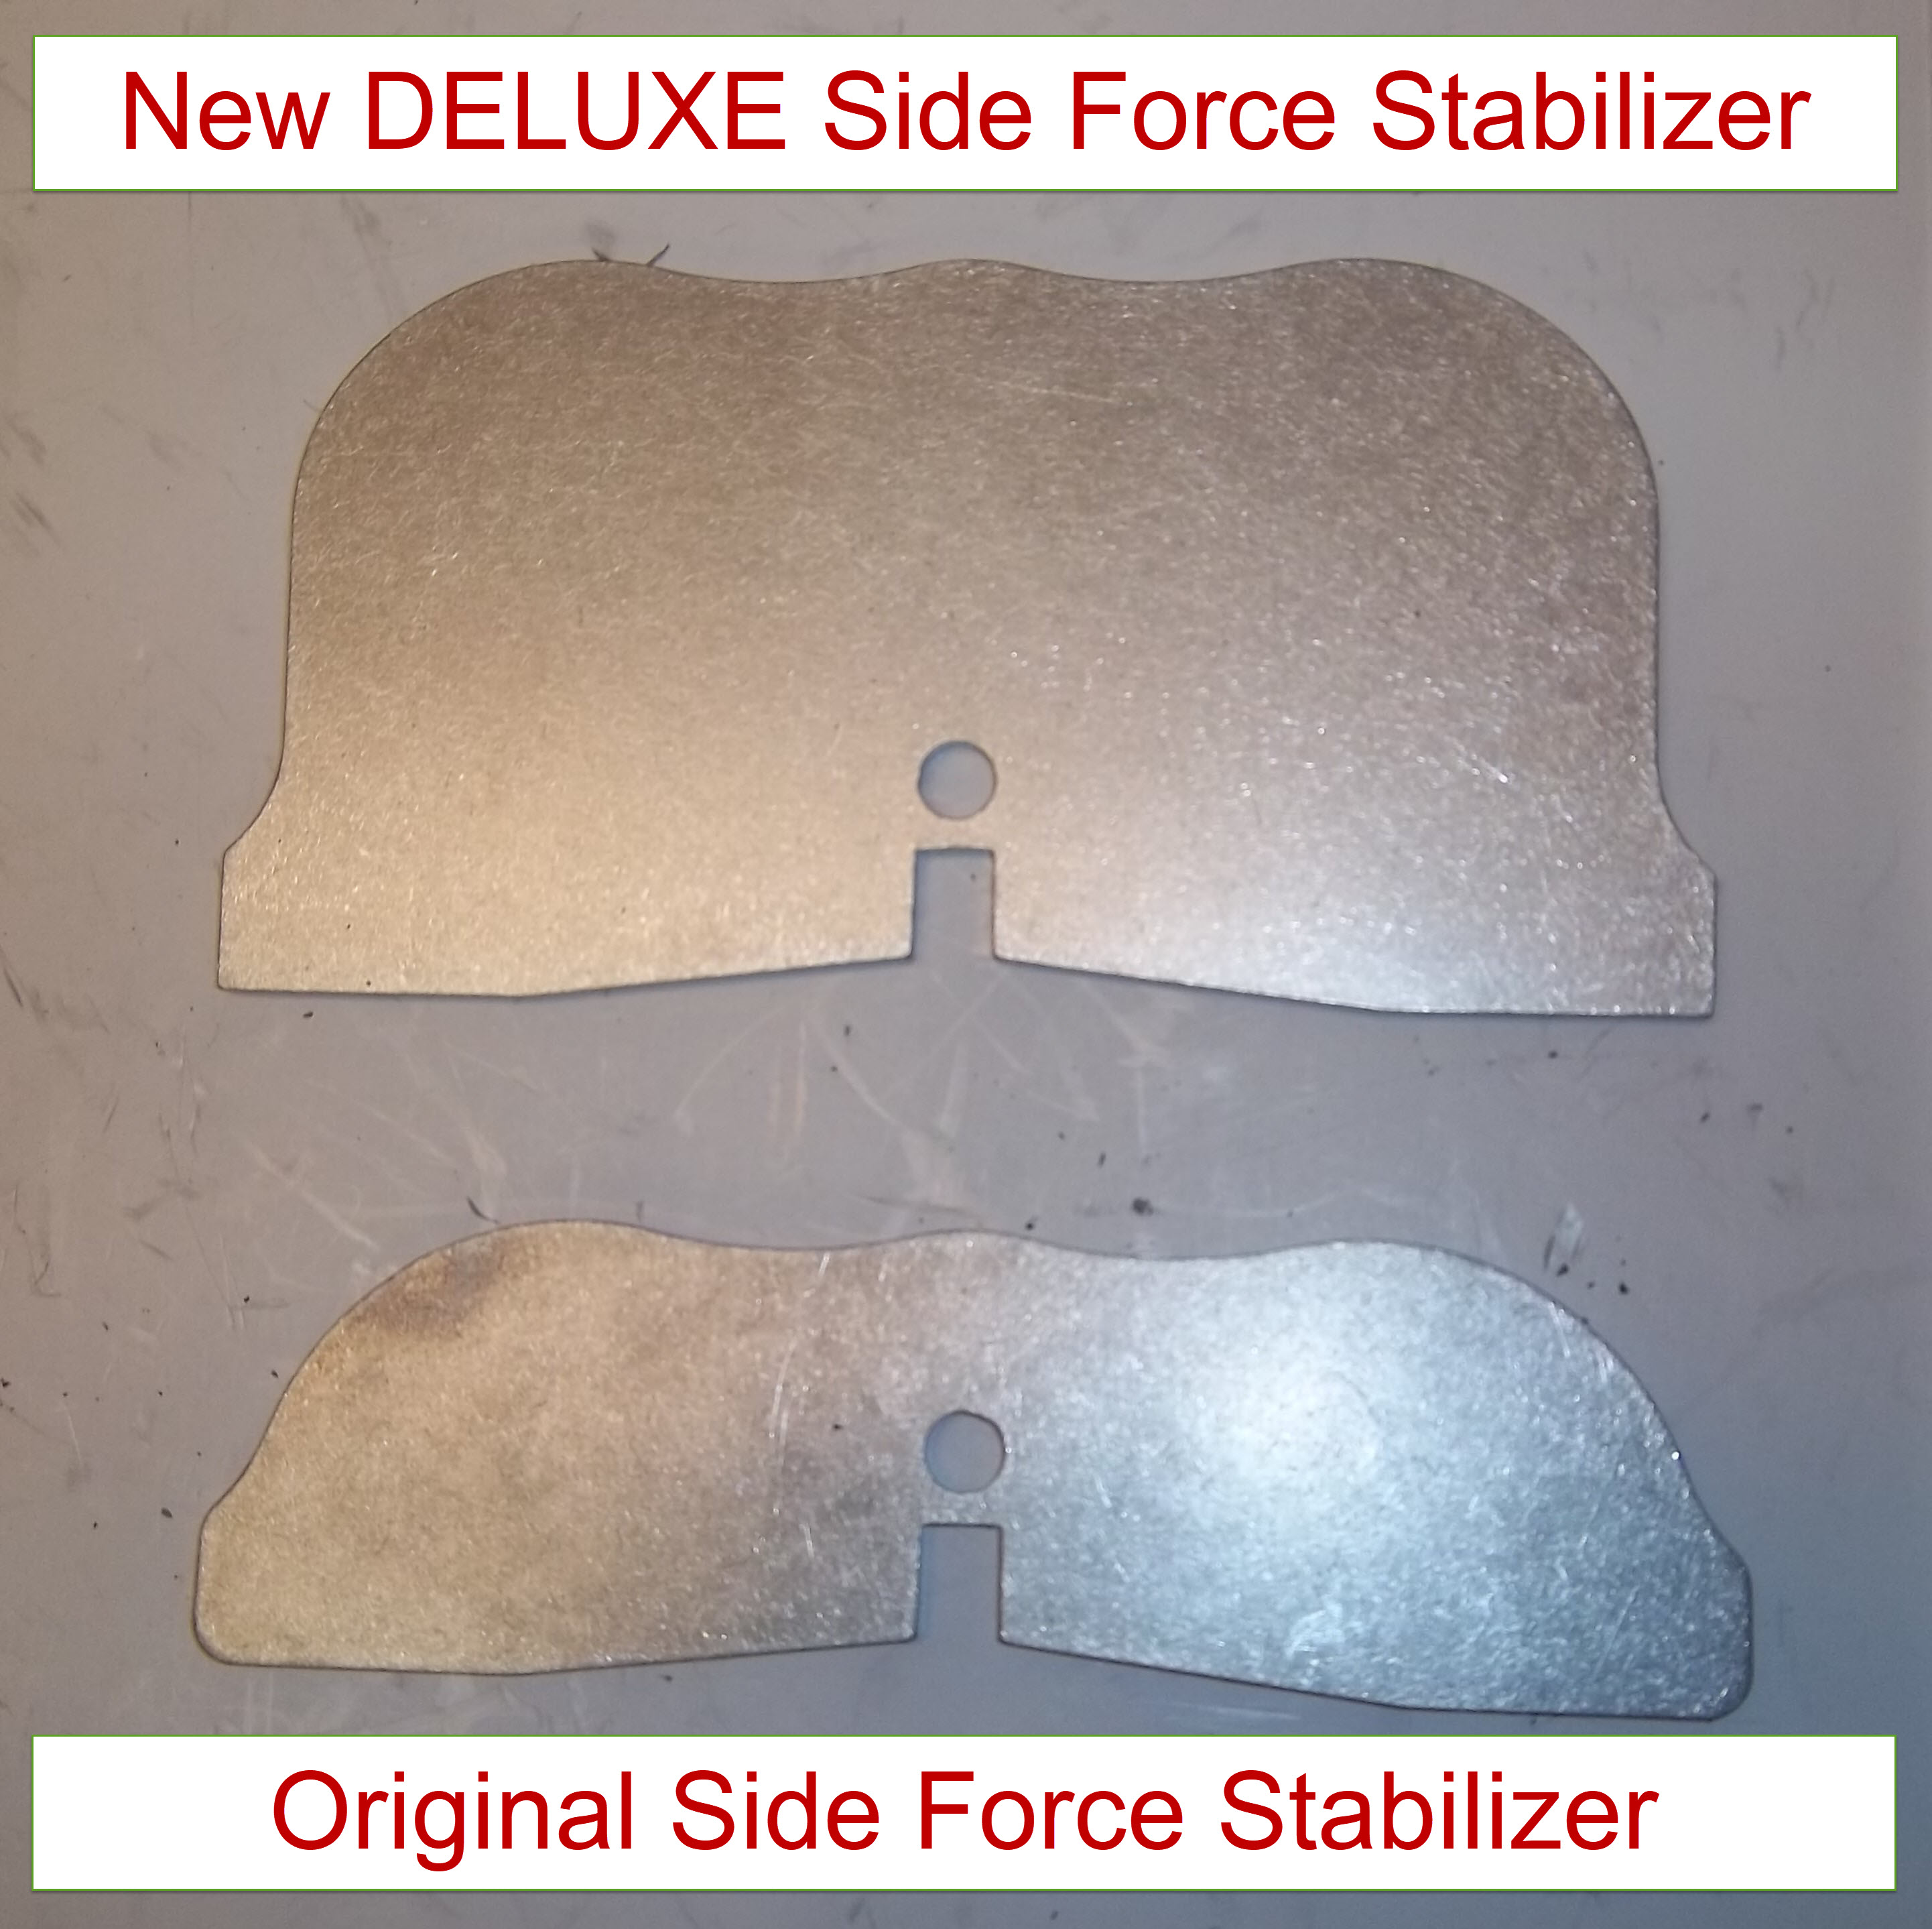 DELUXE Side Force Stabilizer Upgrade